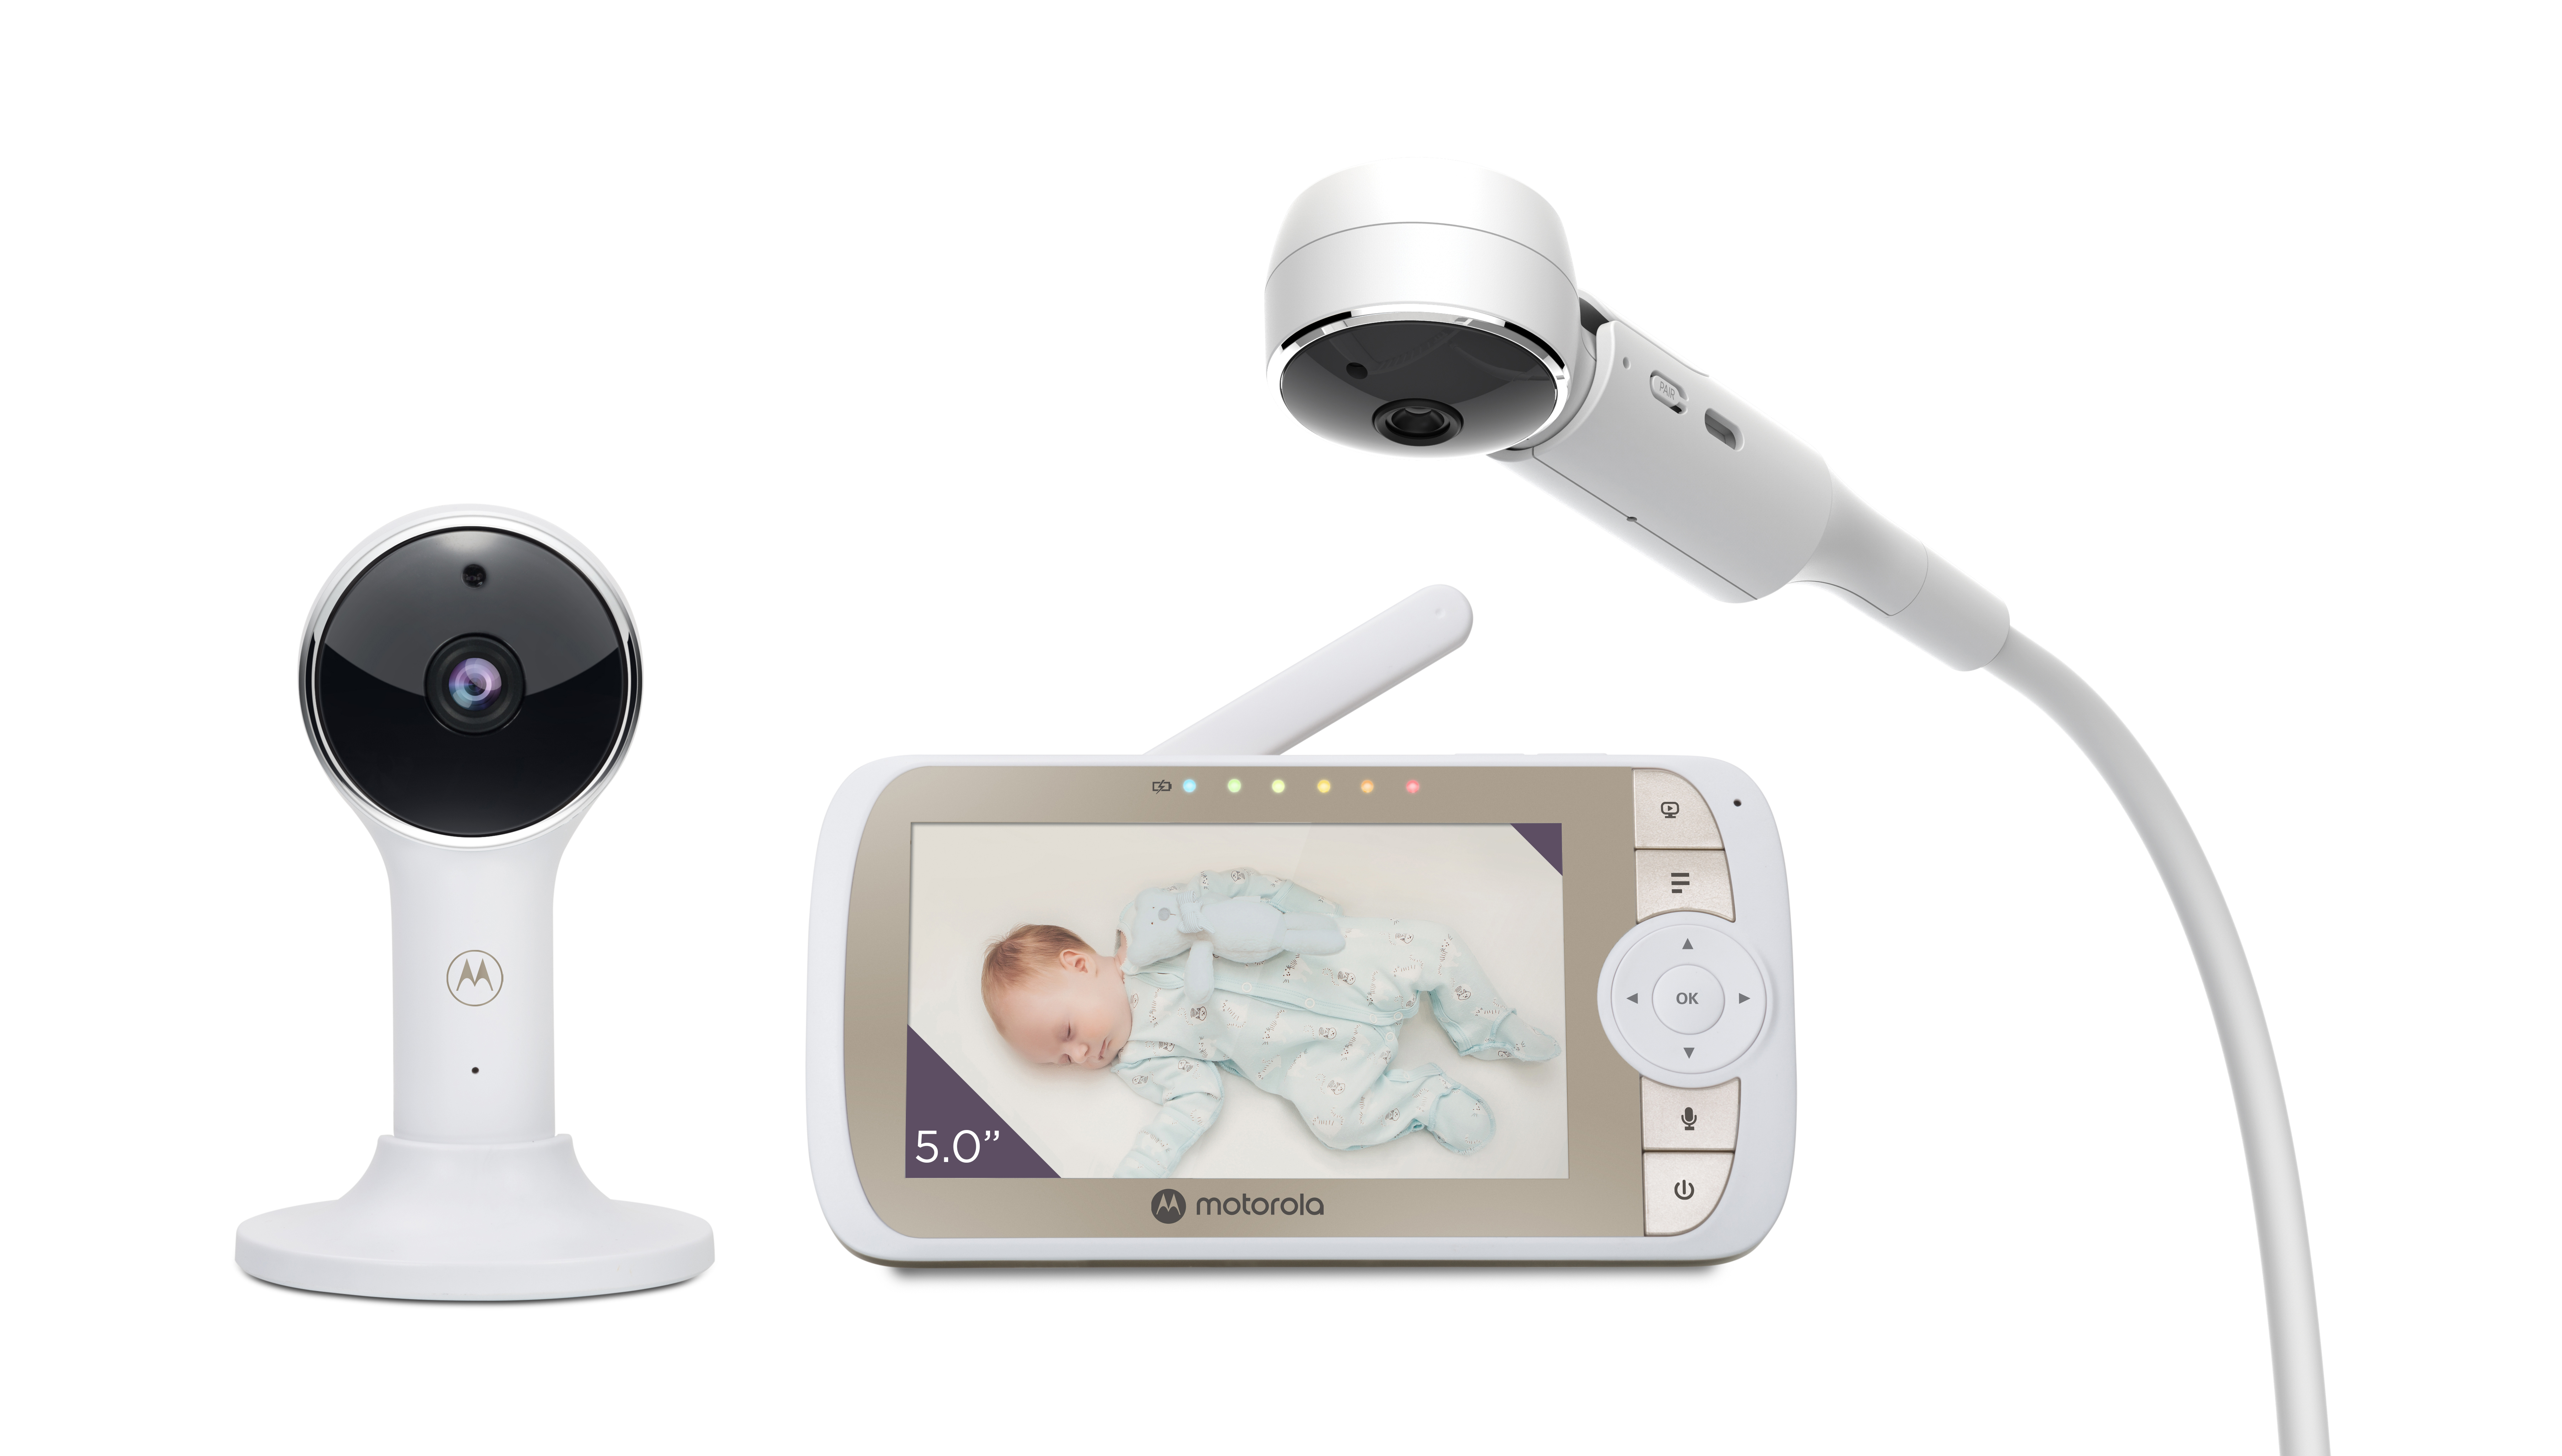 VM65X CONNECT 5.0 inch Full HD Wi-Fi® Video Baby Monitor with Crib Mount - Product image